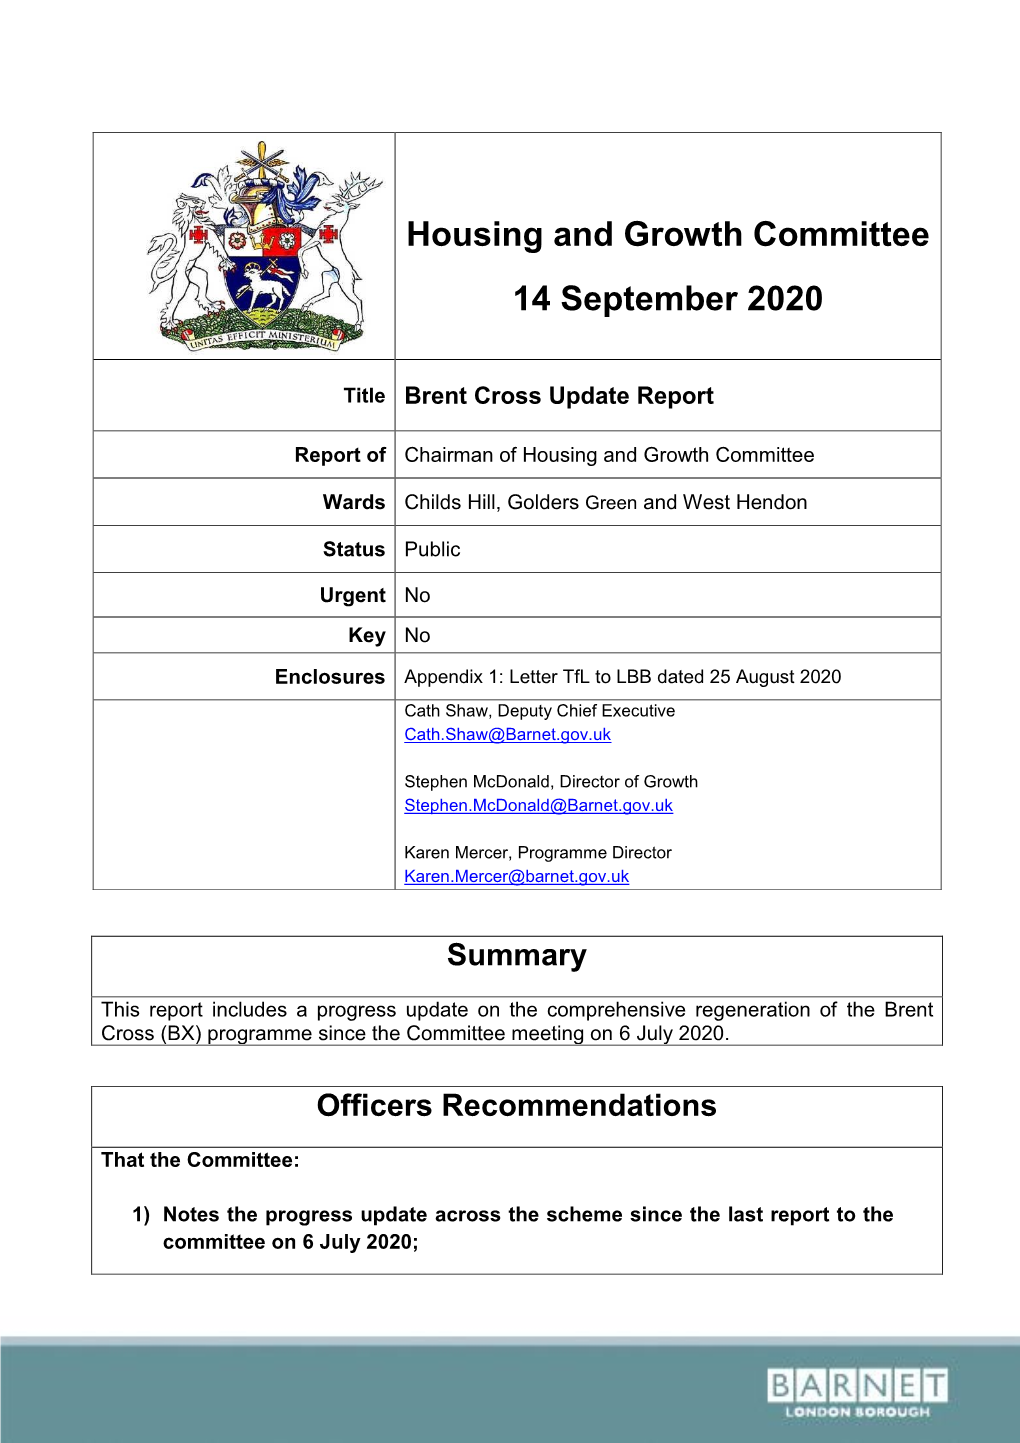 Housing and Growth Committee 14 September 2020